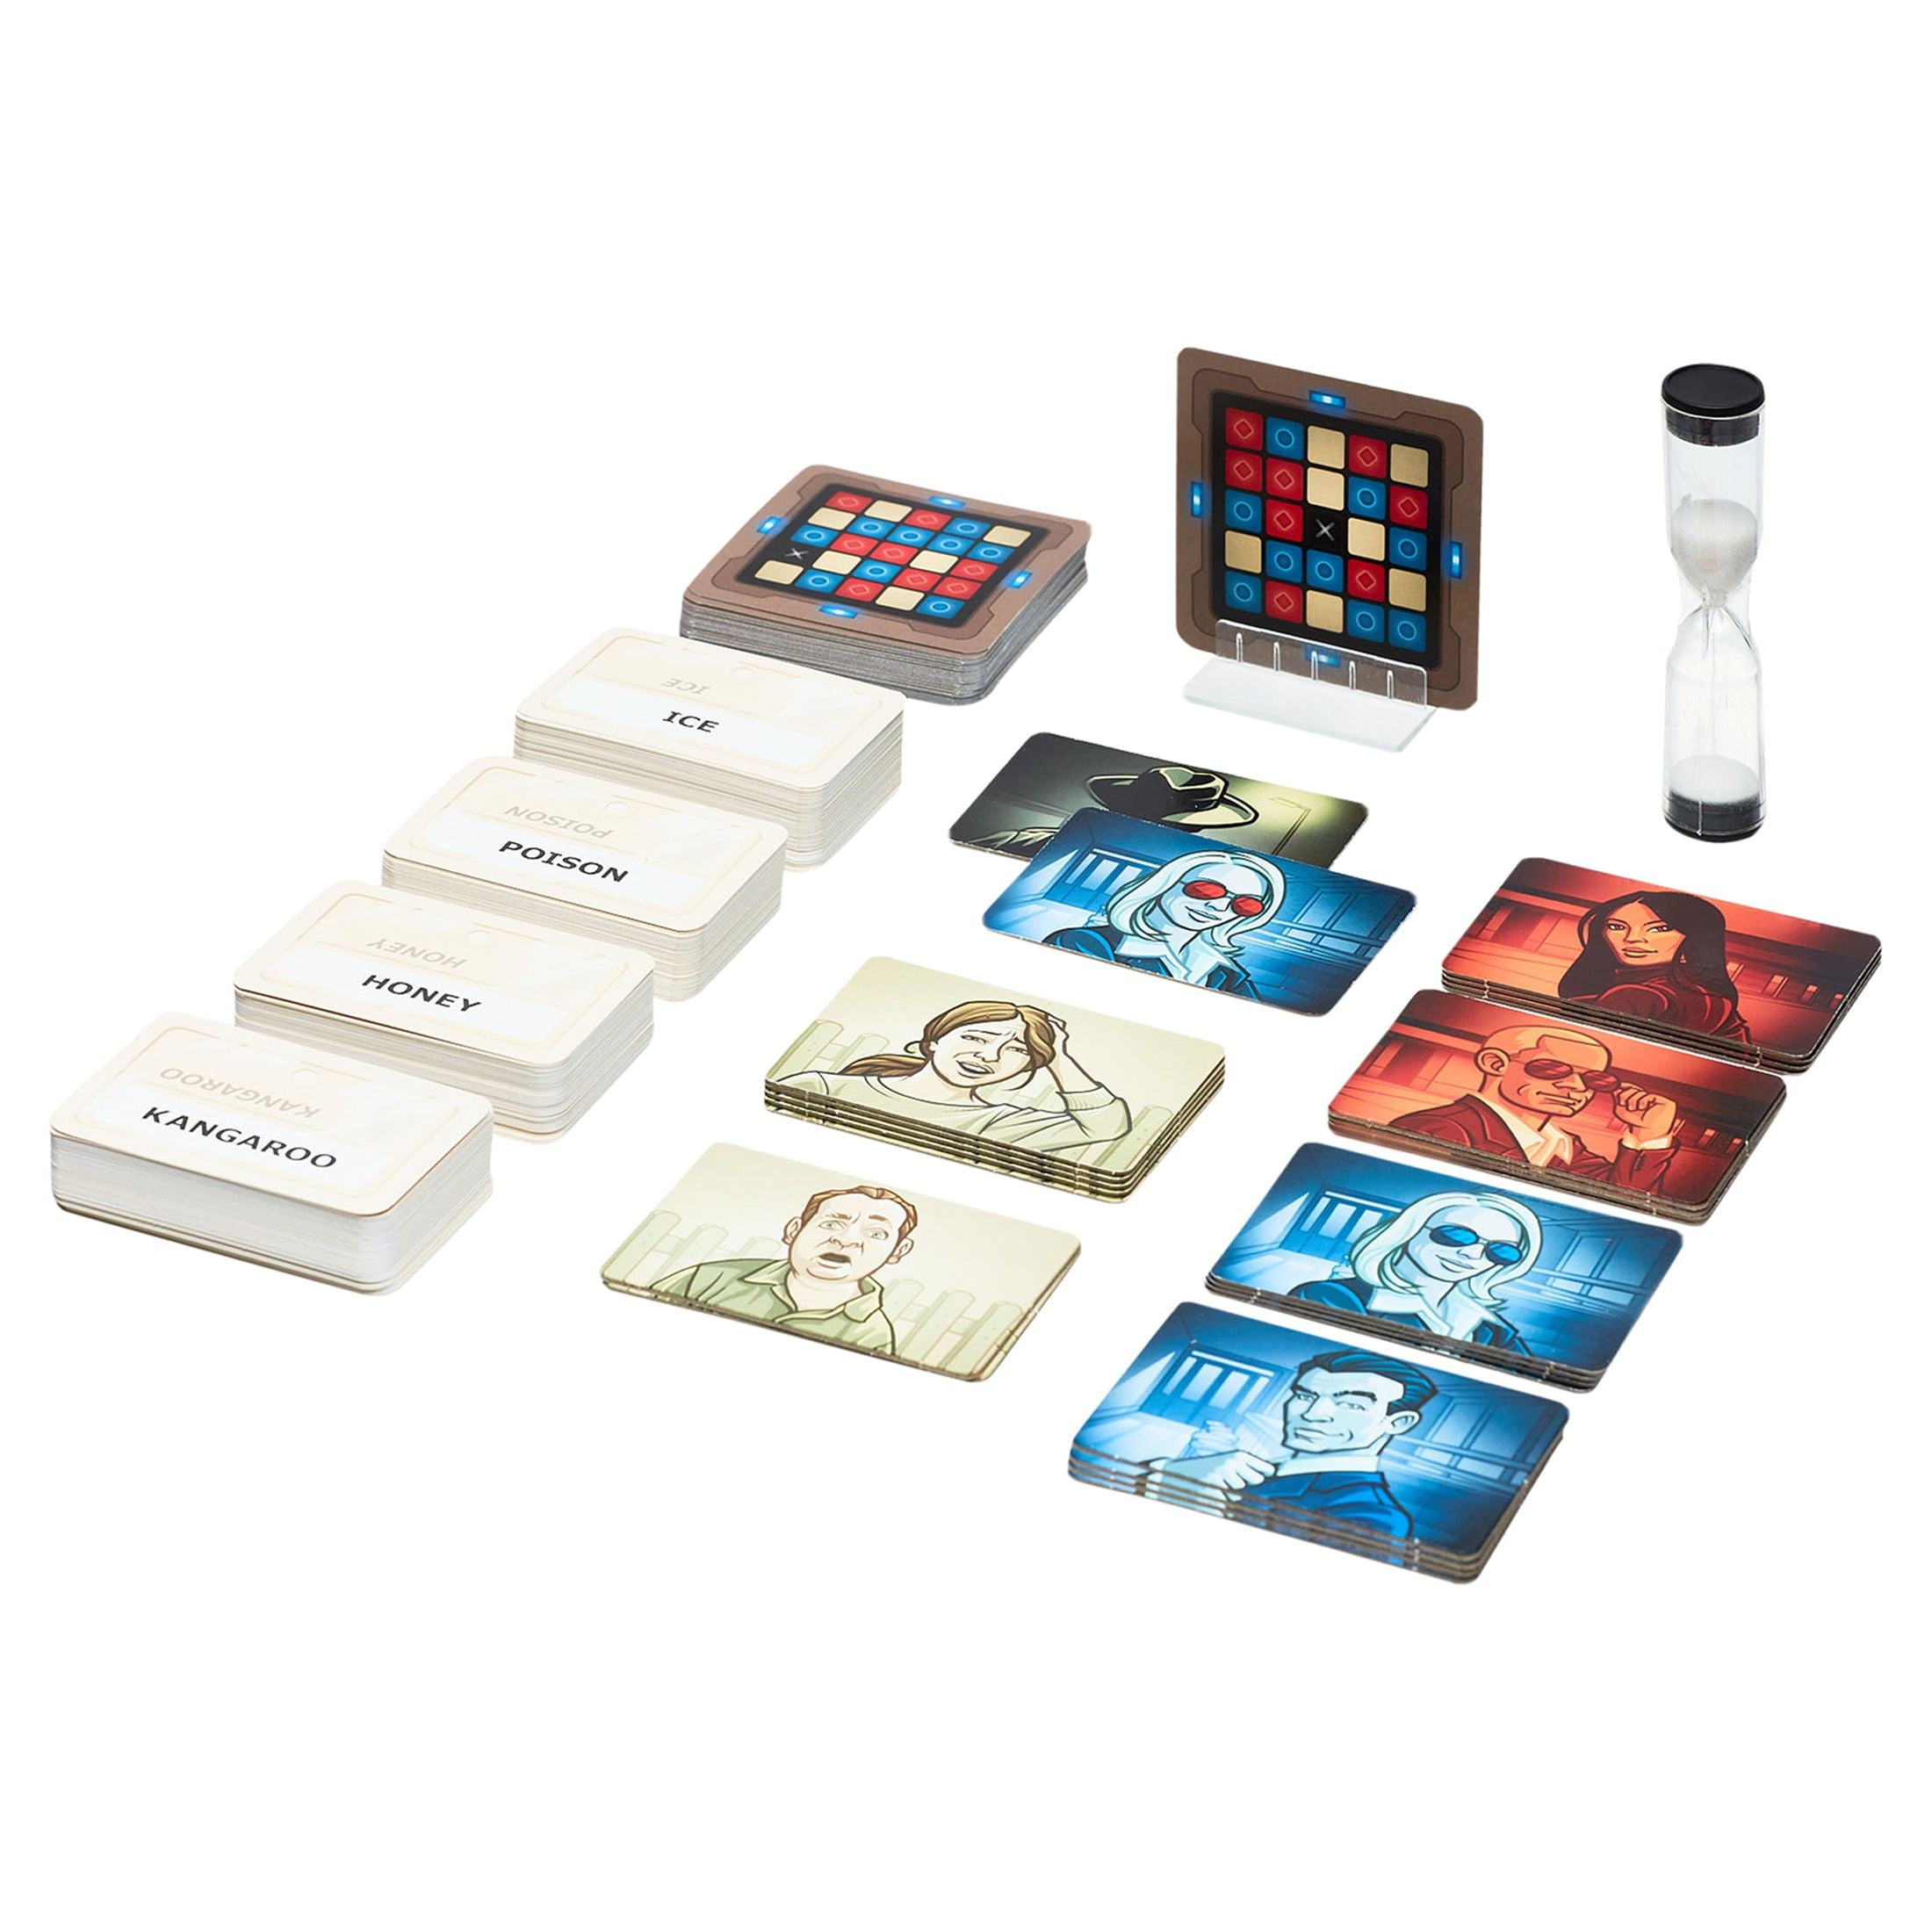 Codenames Czech Games Edition, Board Games for Family and Adults Ages 8+,  For 4+ Players 